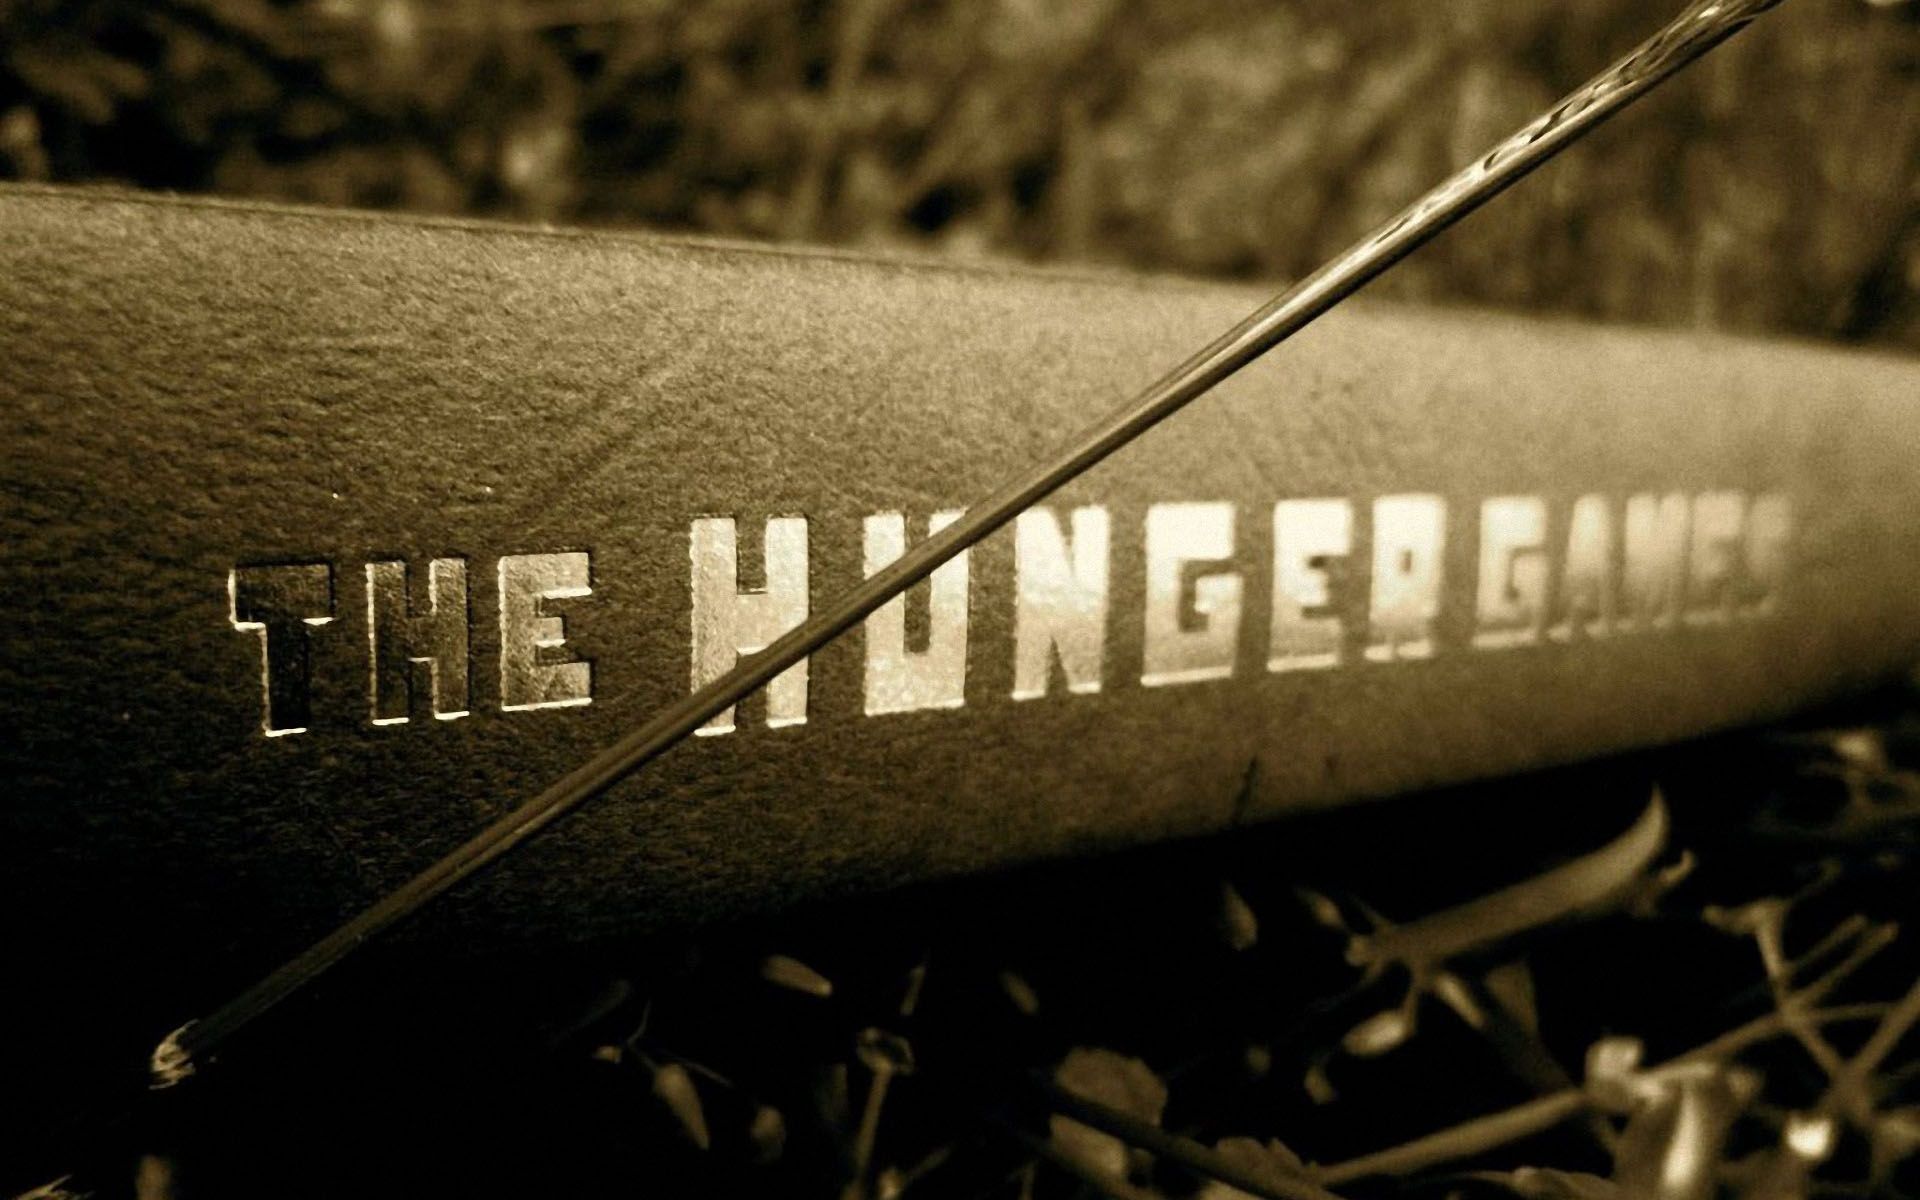 The Hunger Games Poster 1920x1200 Wallpapers, 1920x1200 Wallpapers